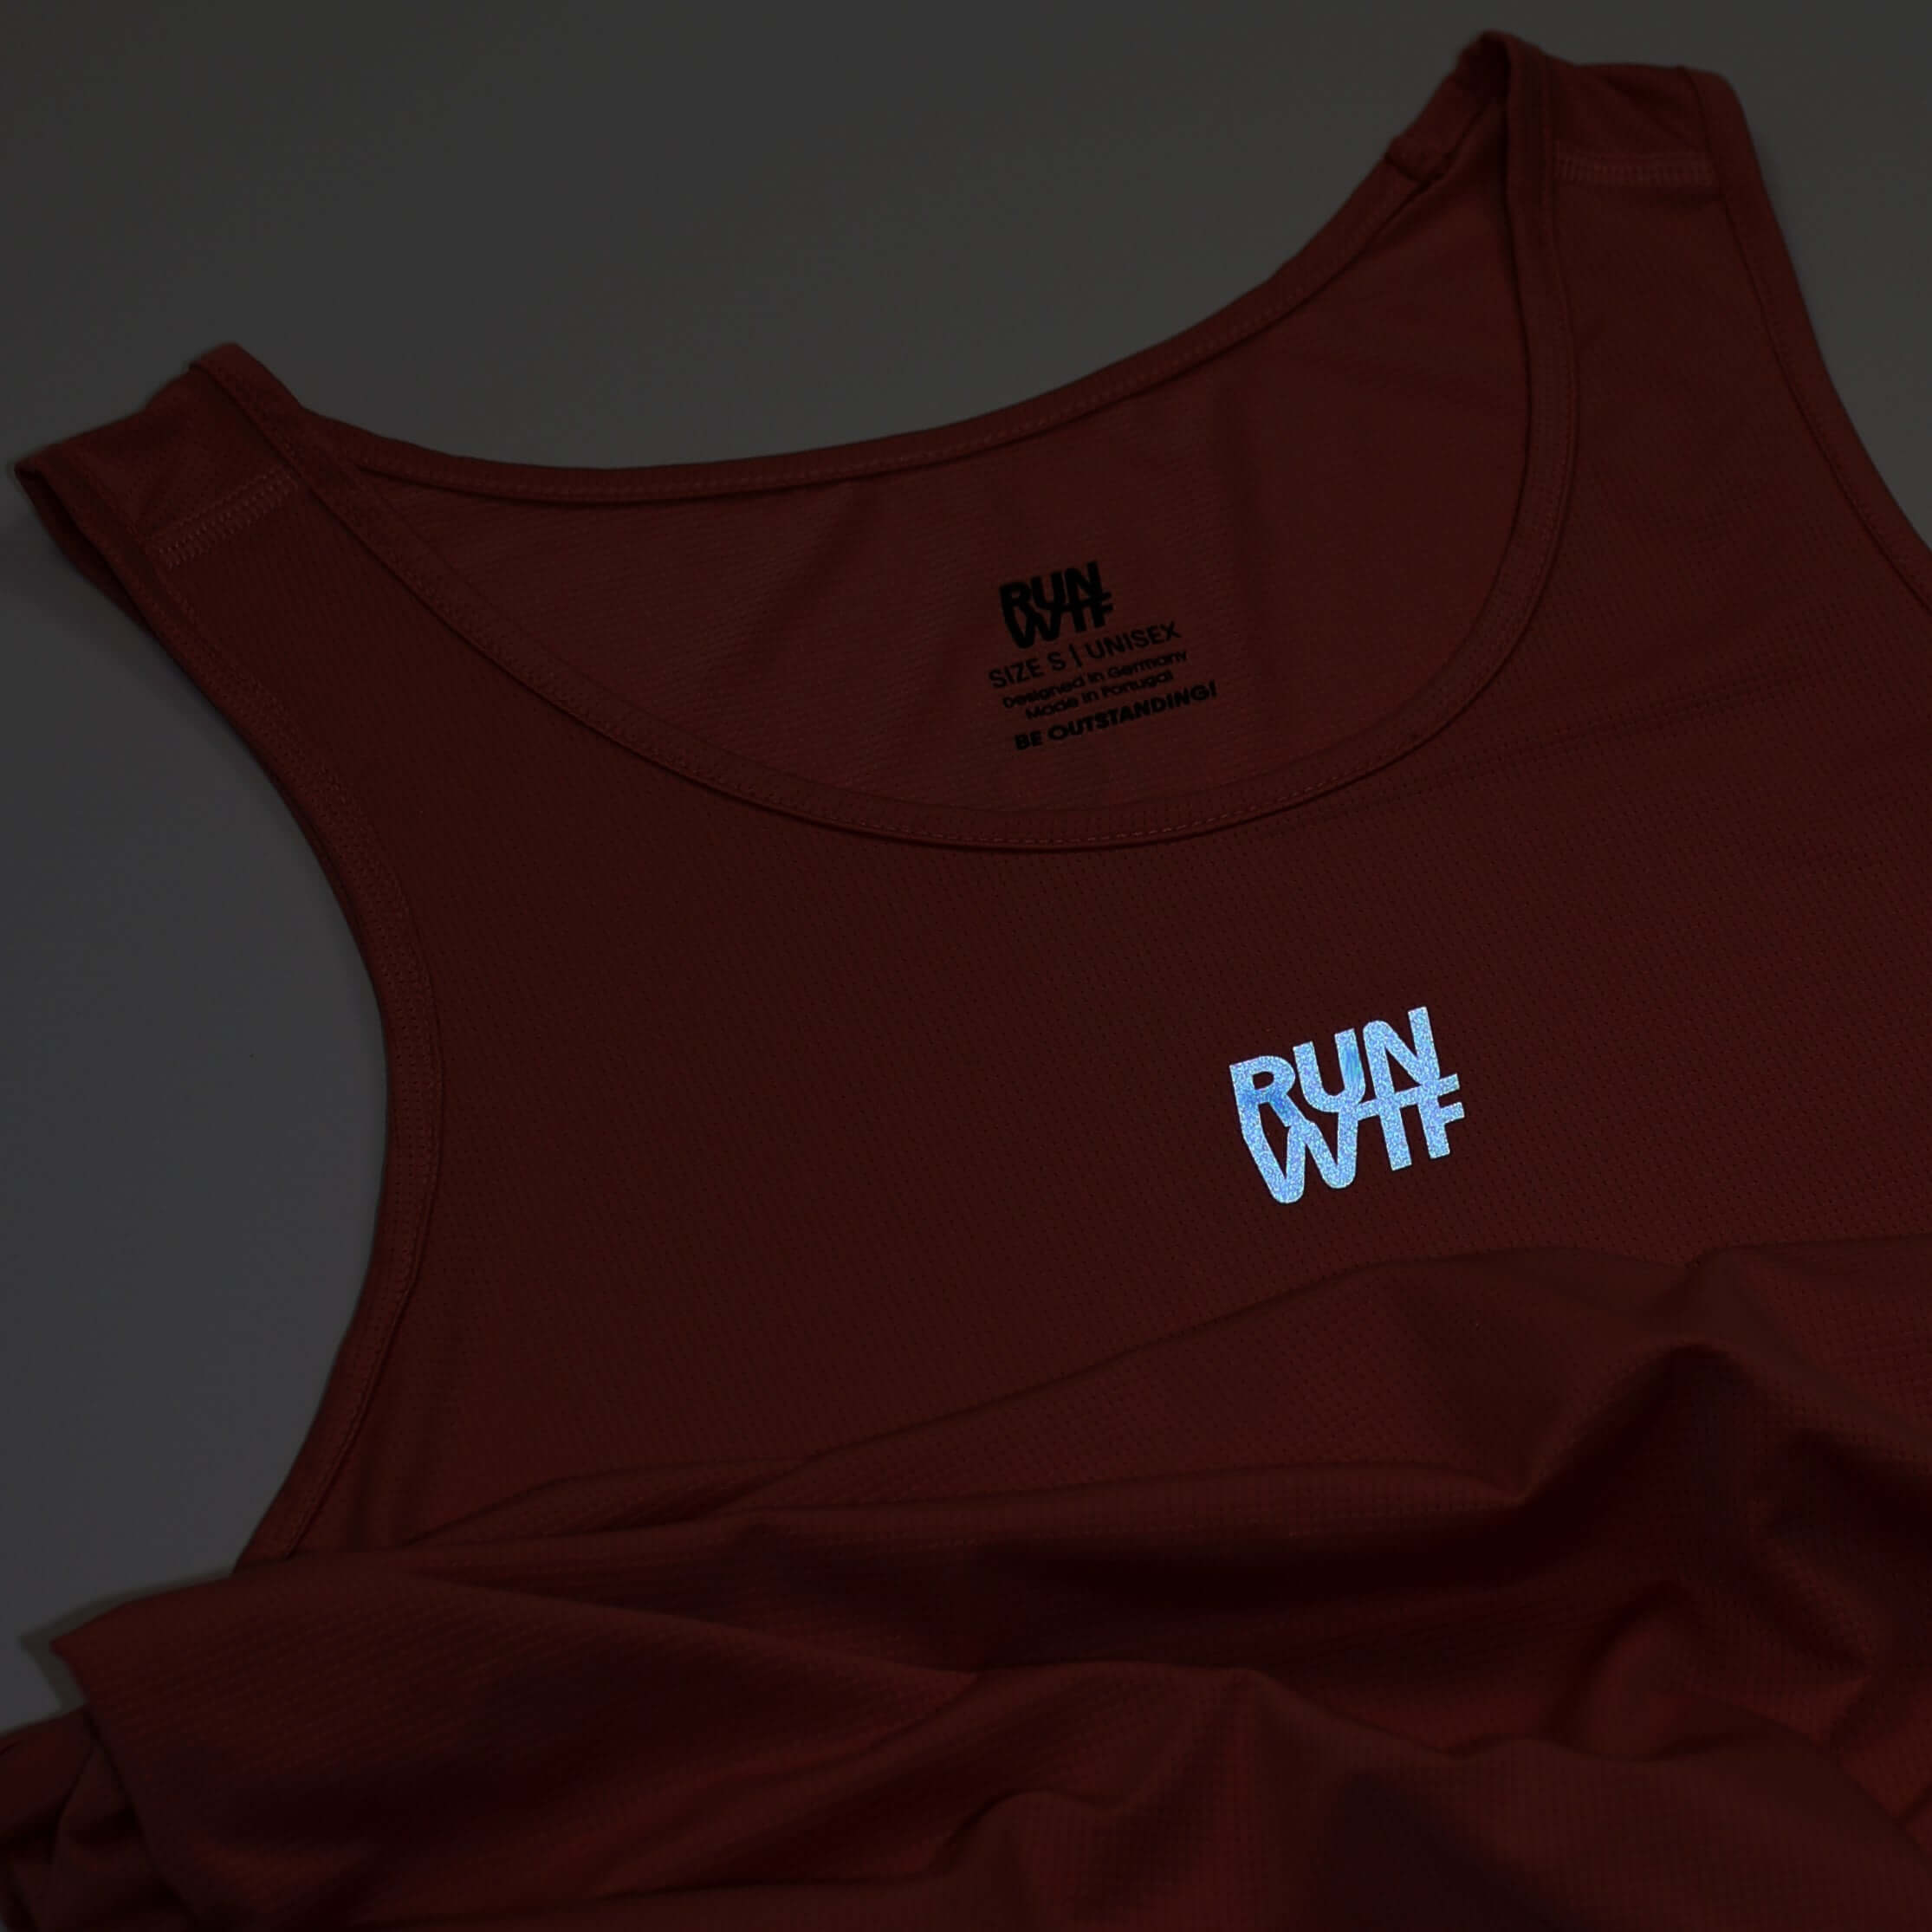 Running Singlet designed for high intensity workouts and racing. Lightweight and moisture-wicking made from Recycling Polyester.